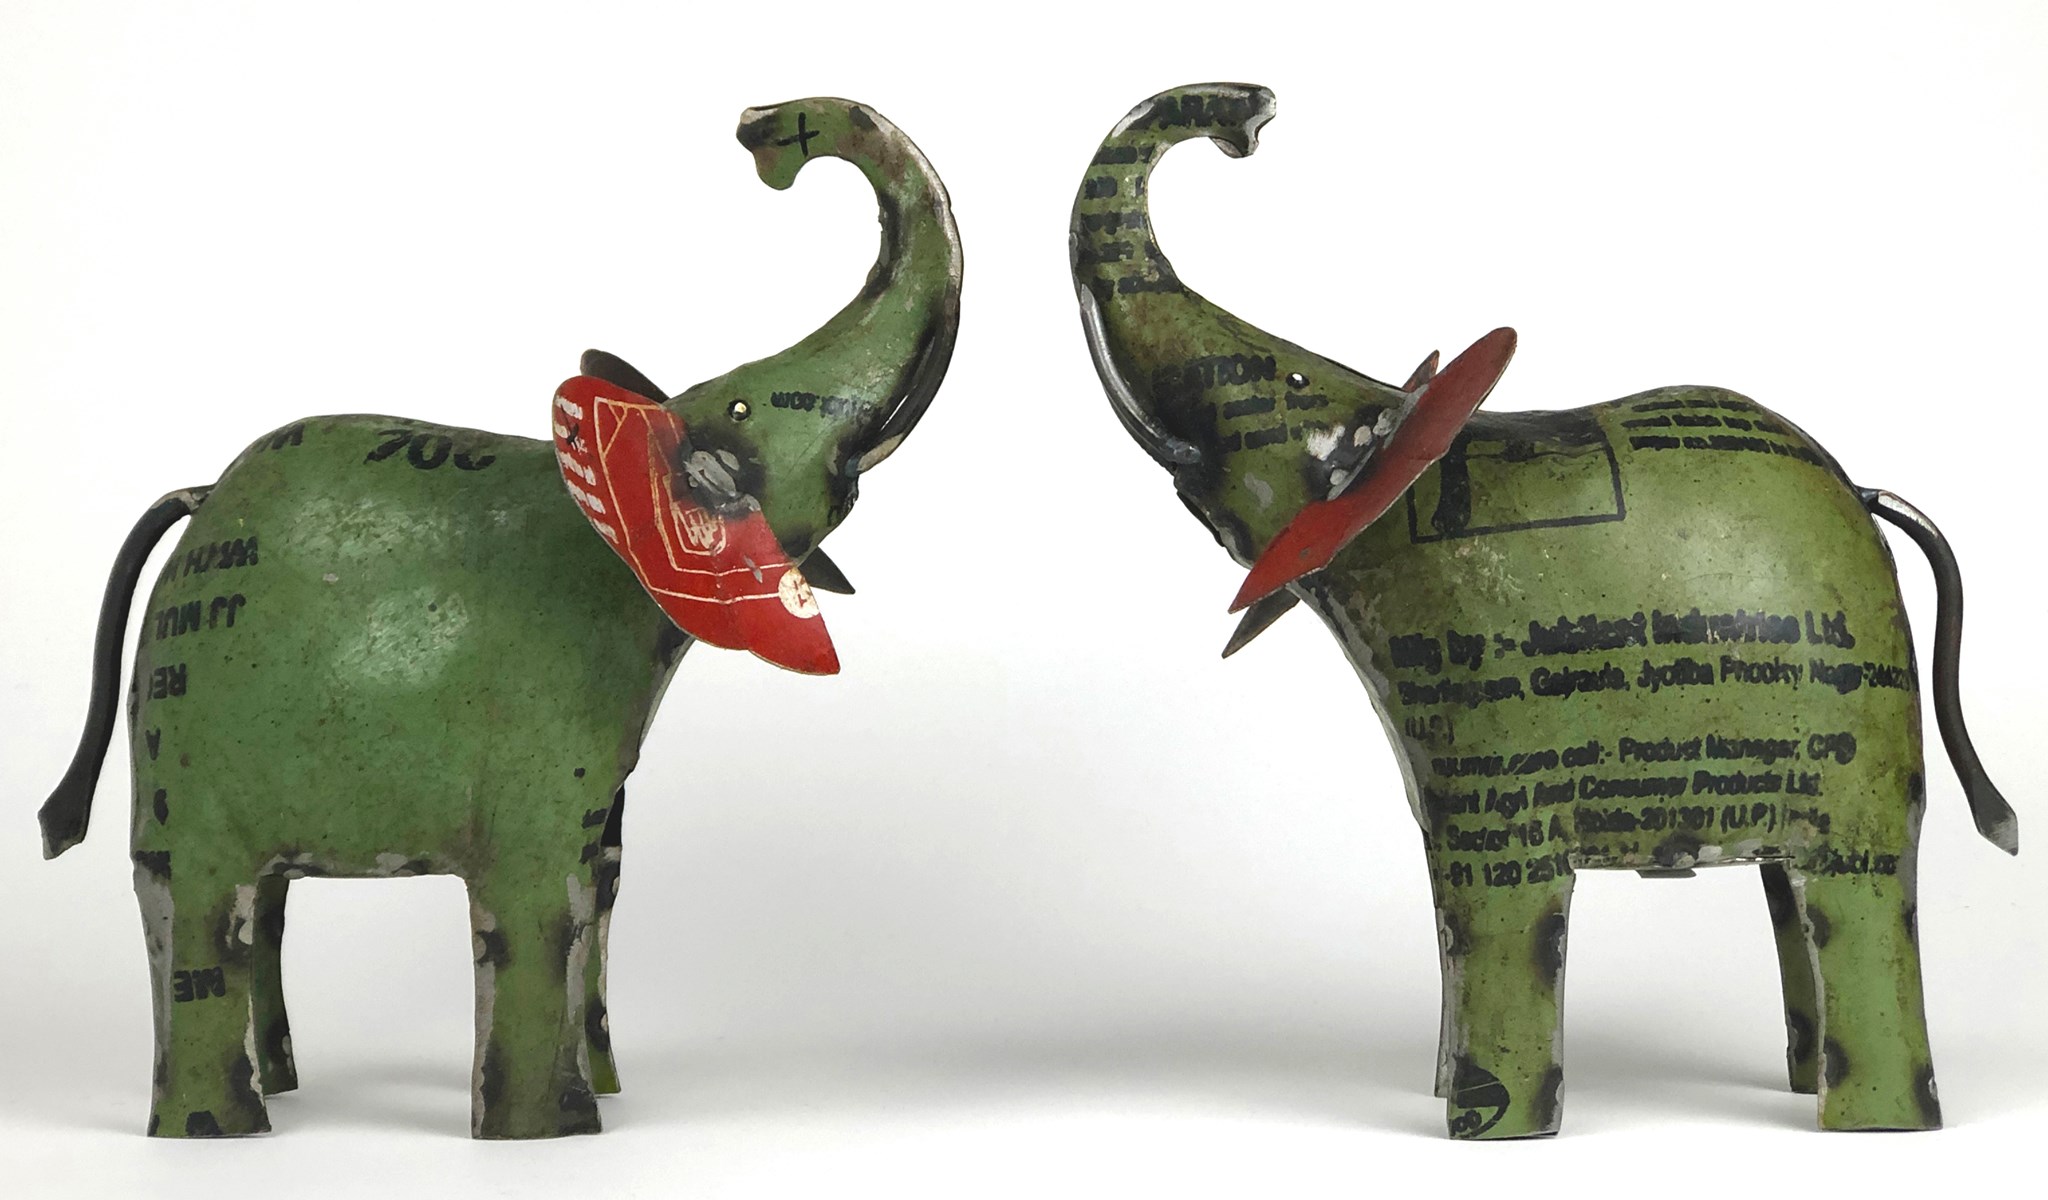 Two metal green elephant toys facing each other on a white background